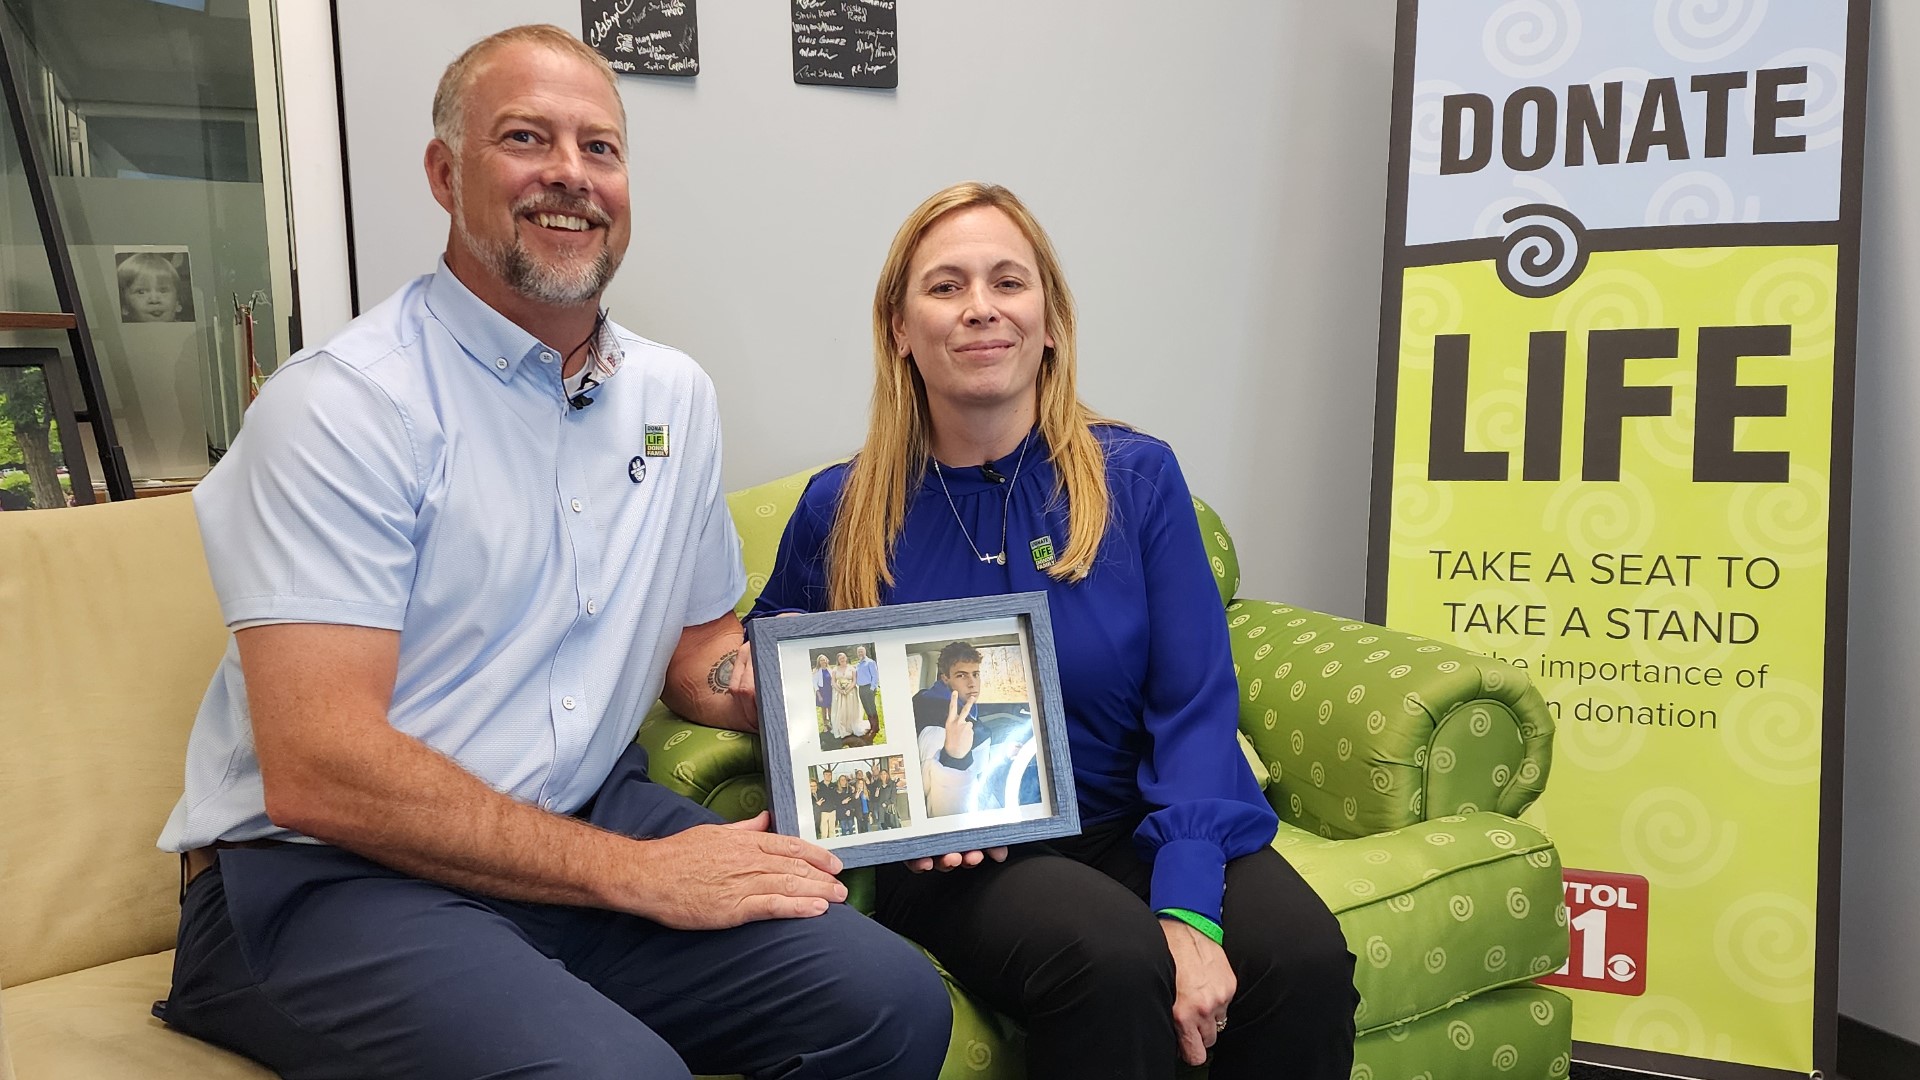 Cory and Shari Foltz said their son always had a caring heart, so they were not surprised to learn he was a registered organ donor. His gifts have connected lives.